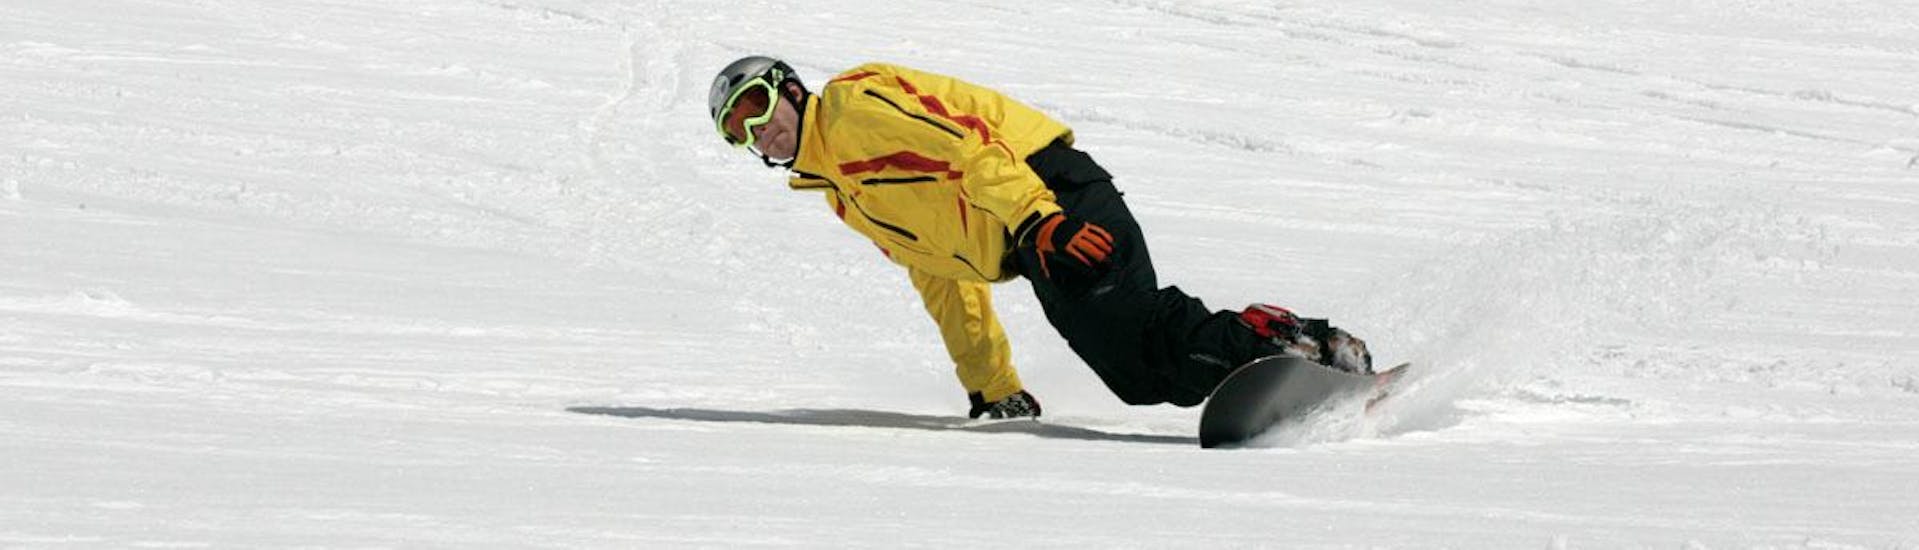 Adult Snowboarding Lessons for First Timer.